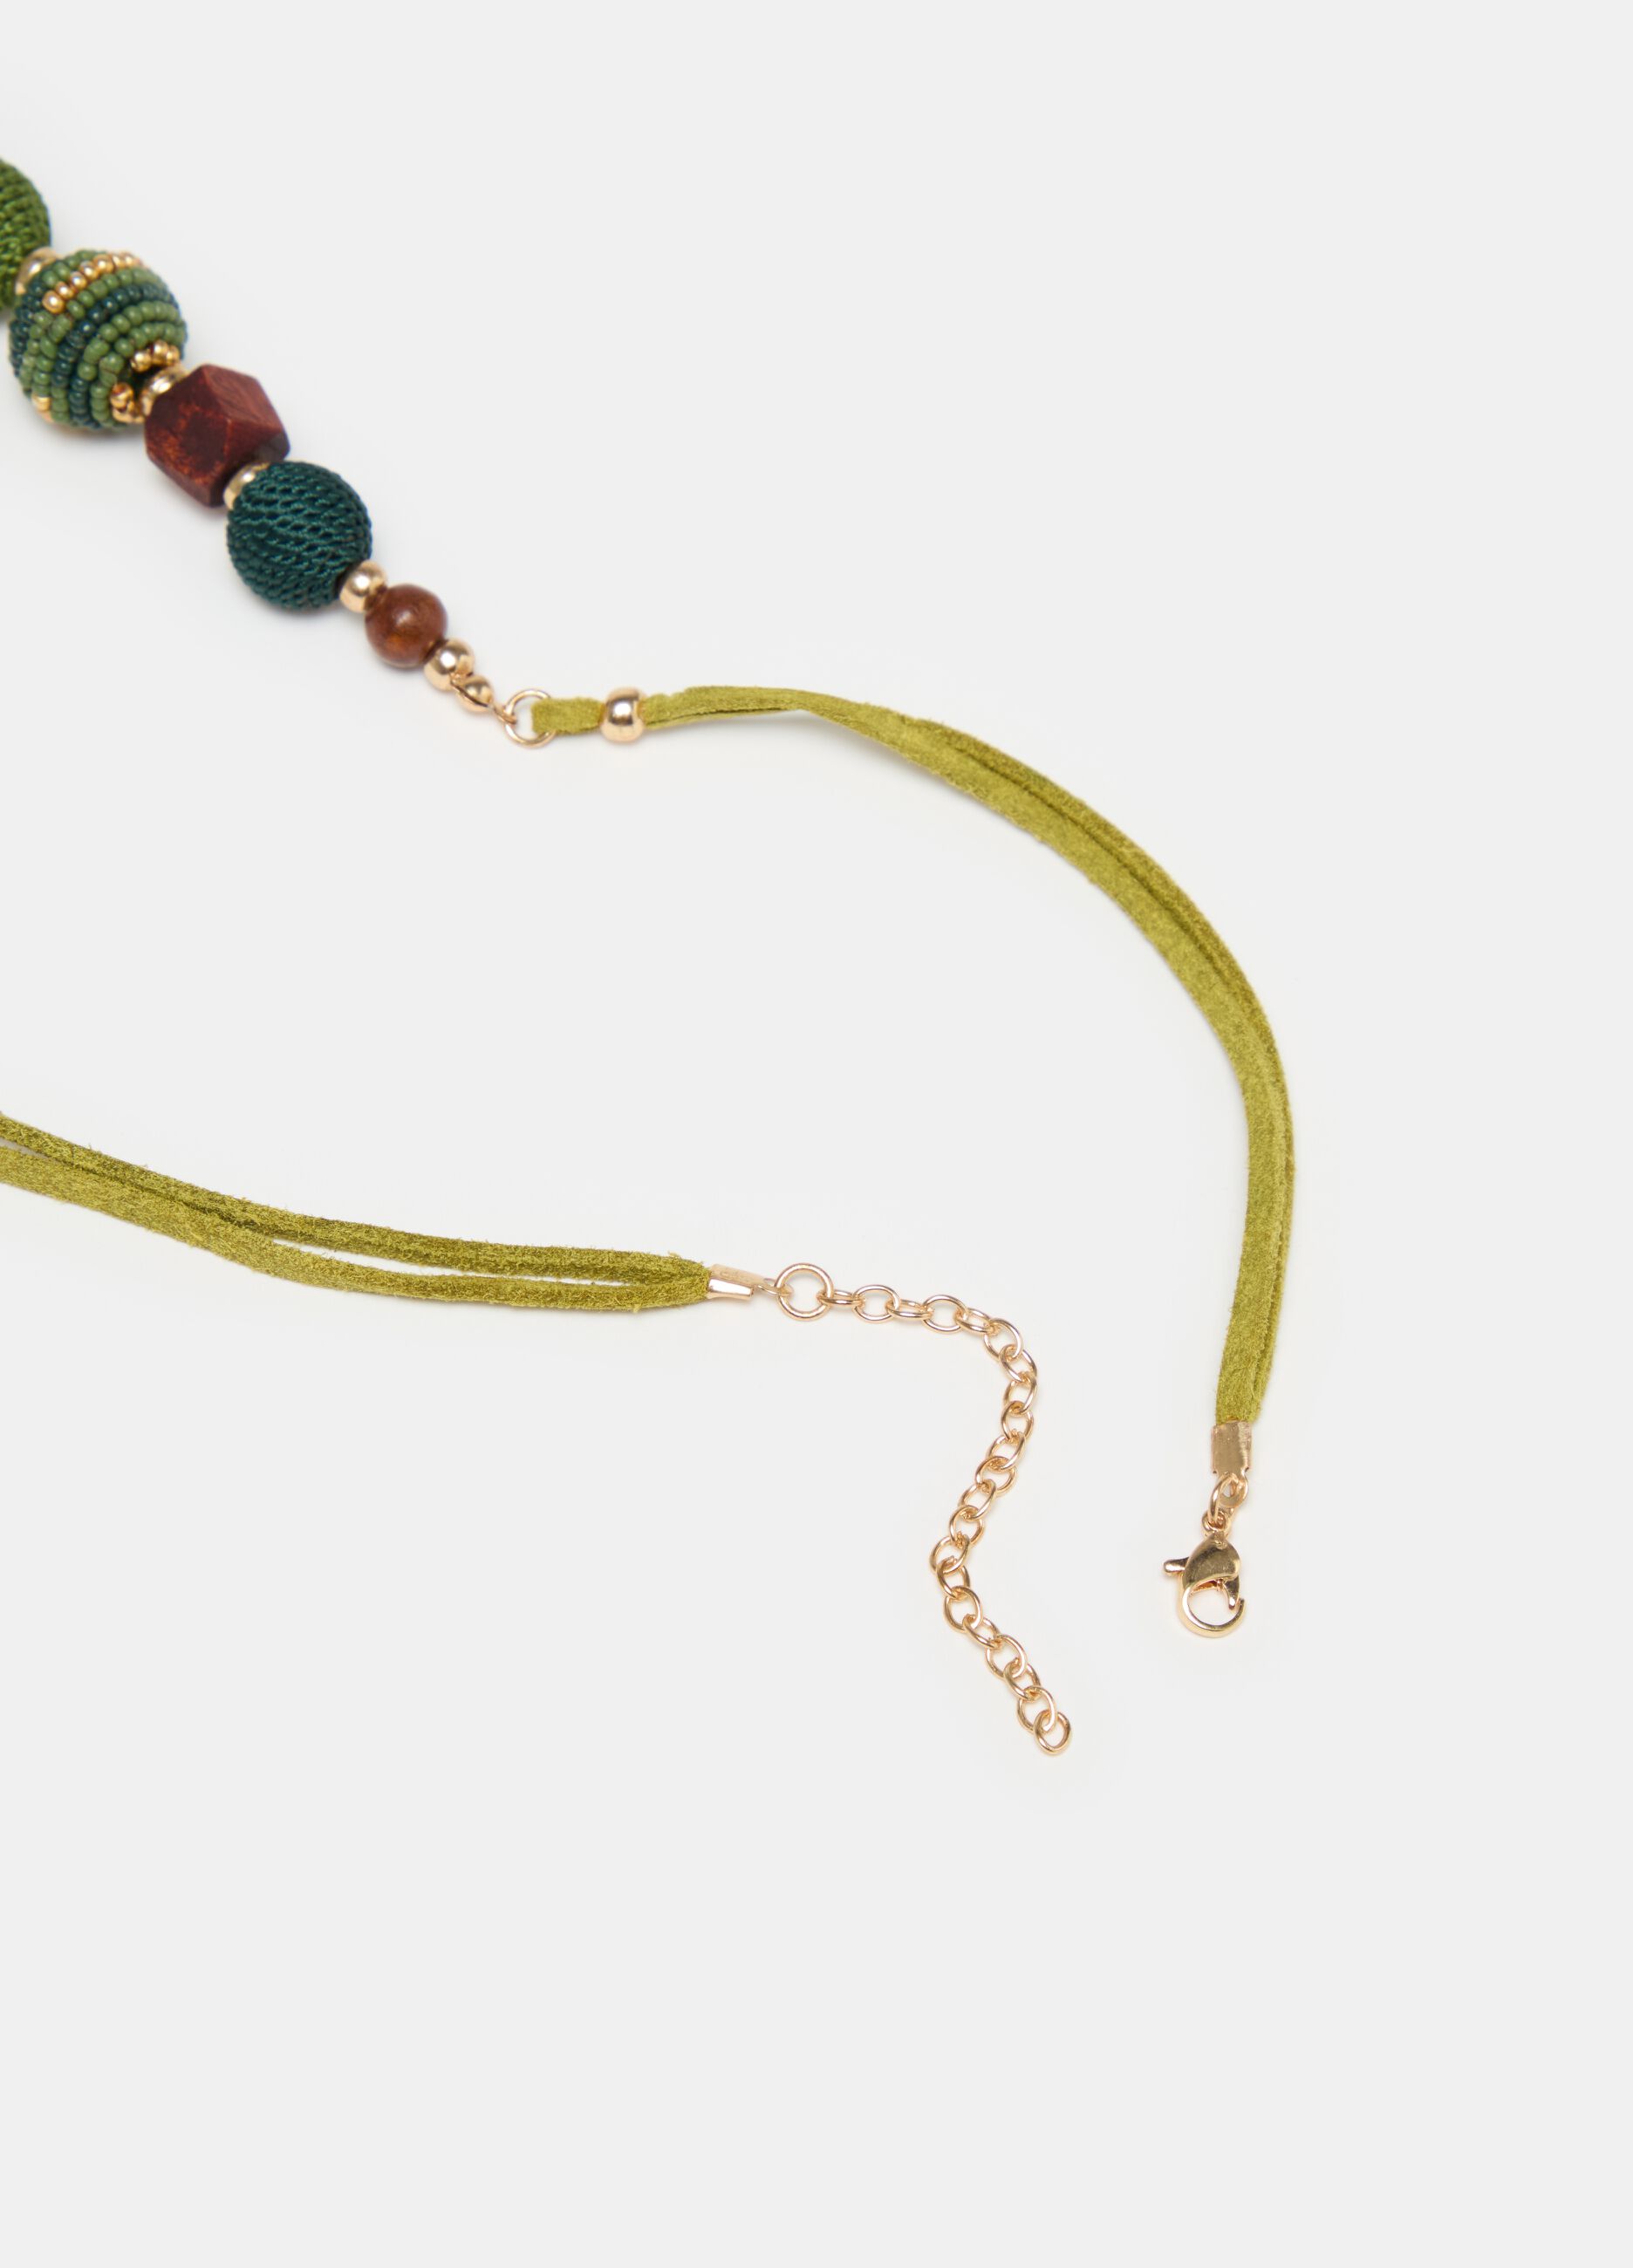 Ethnic necklace with stones and beads